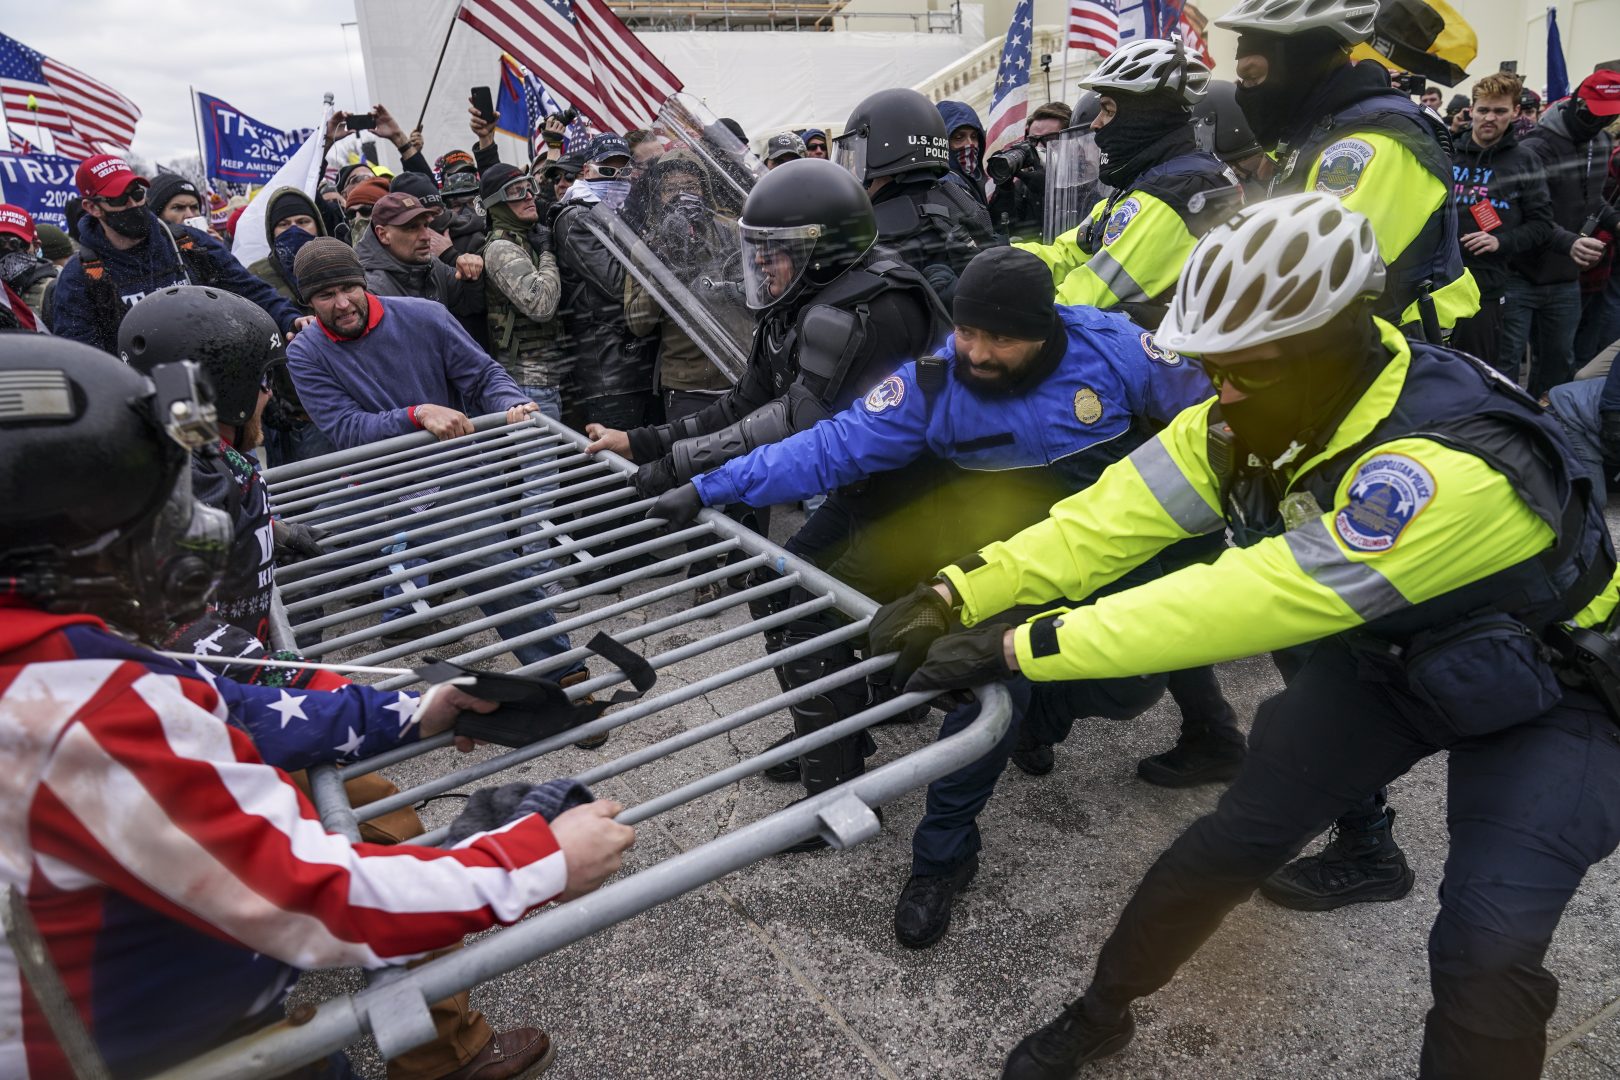 Rioters try to break through a police barrier at the Capitol in Washington, on Jan. 6, 2021. Egged on by soon-to-be former President Donald Trump, a crowd of demonstrators demanded that the electoral vote counting be stopped. 